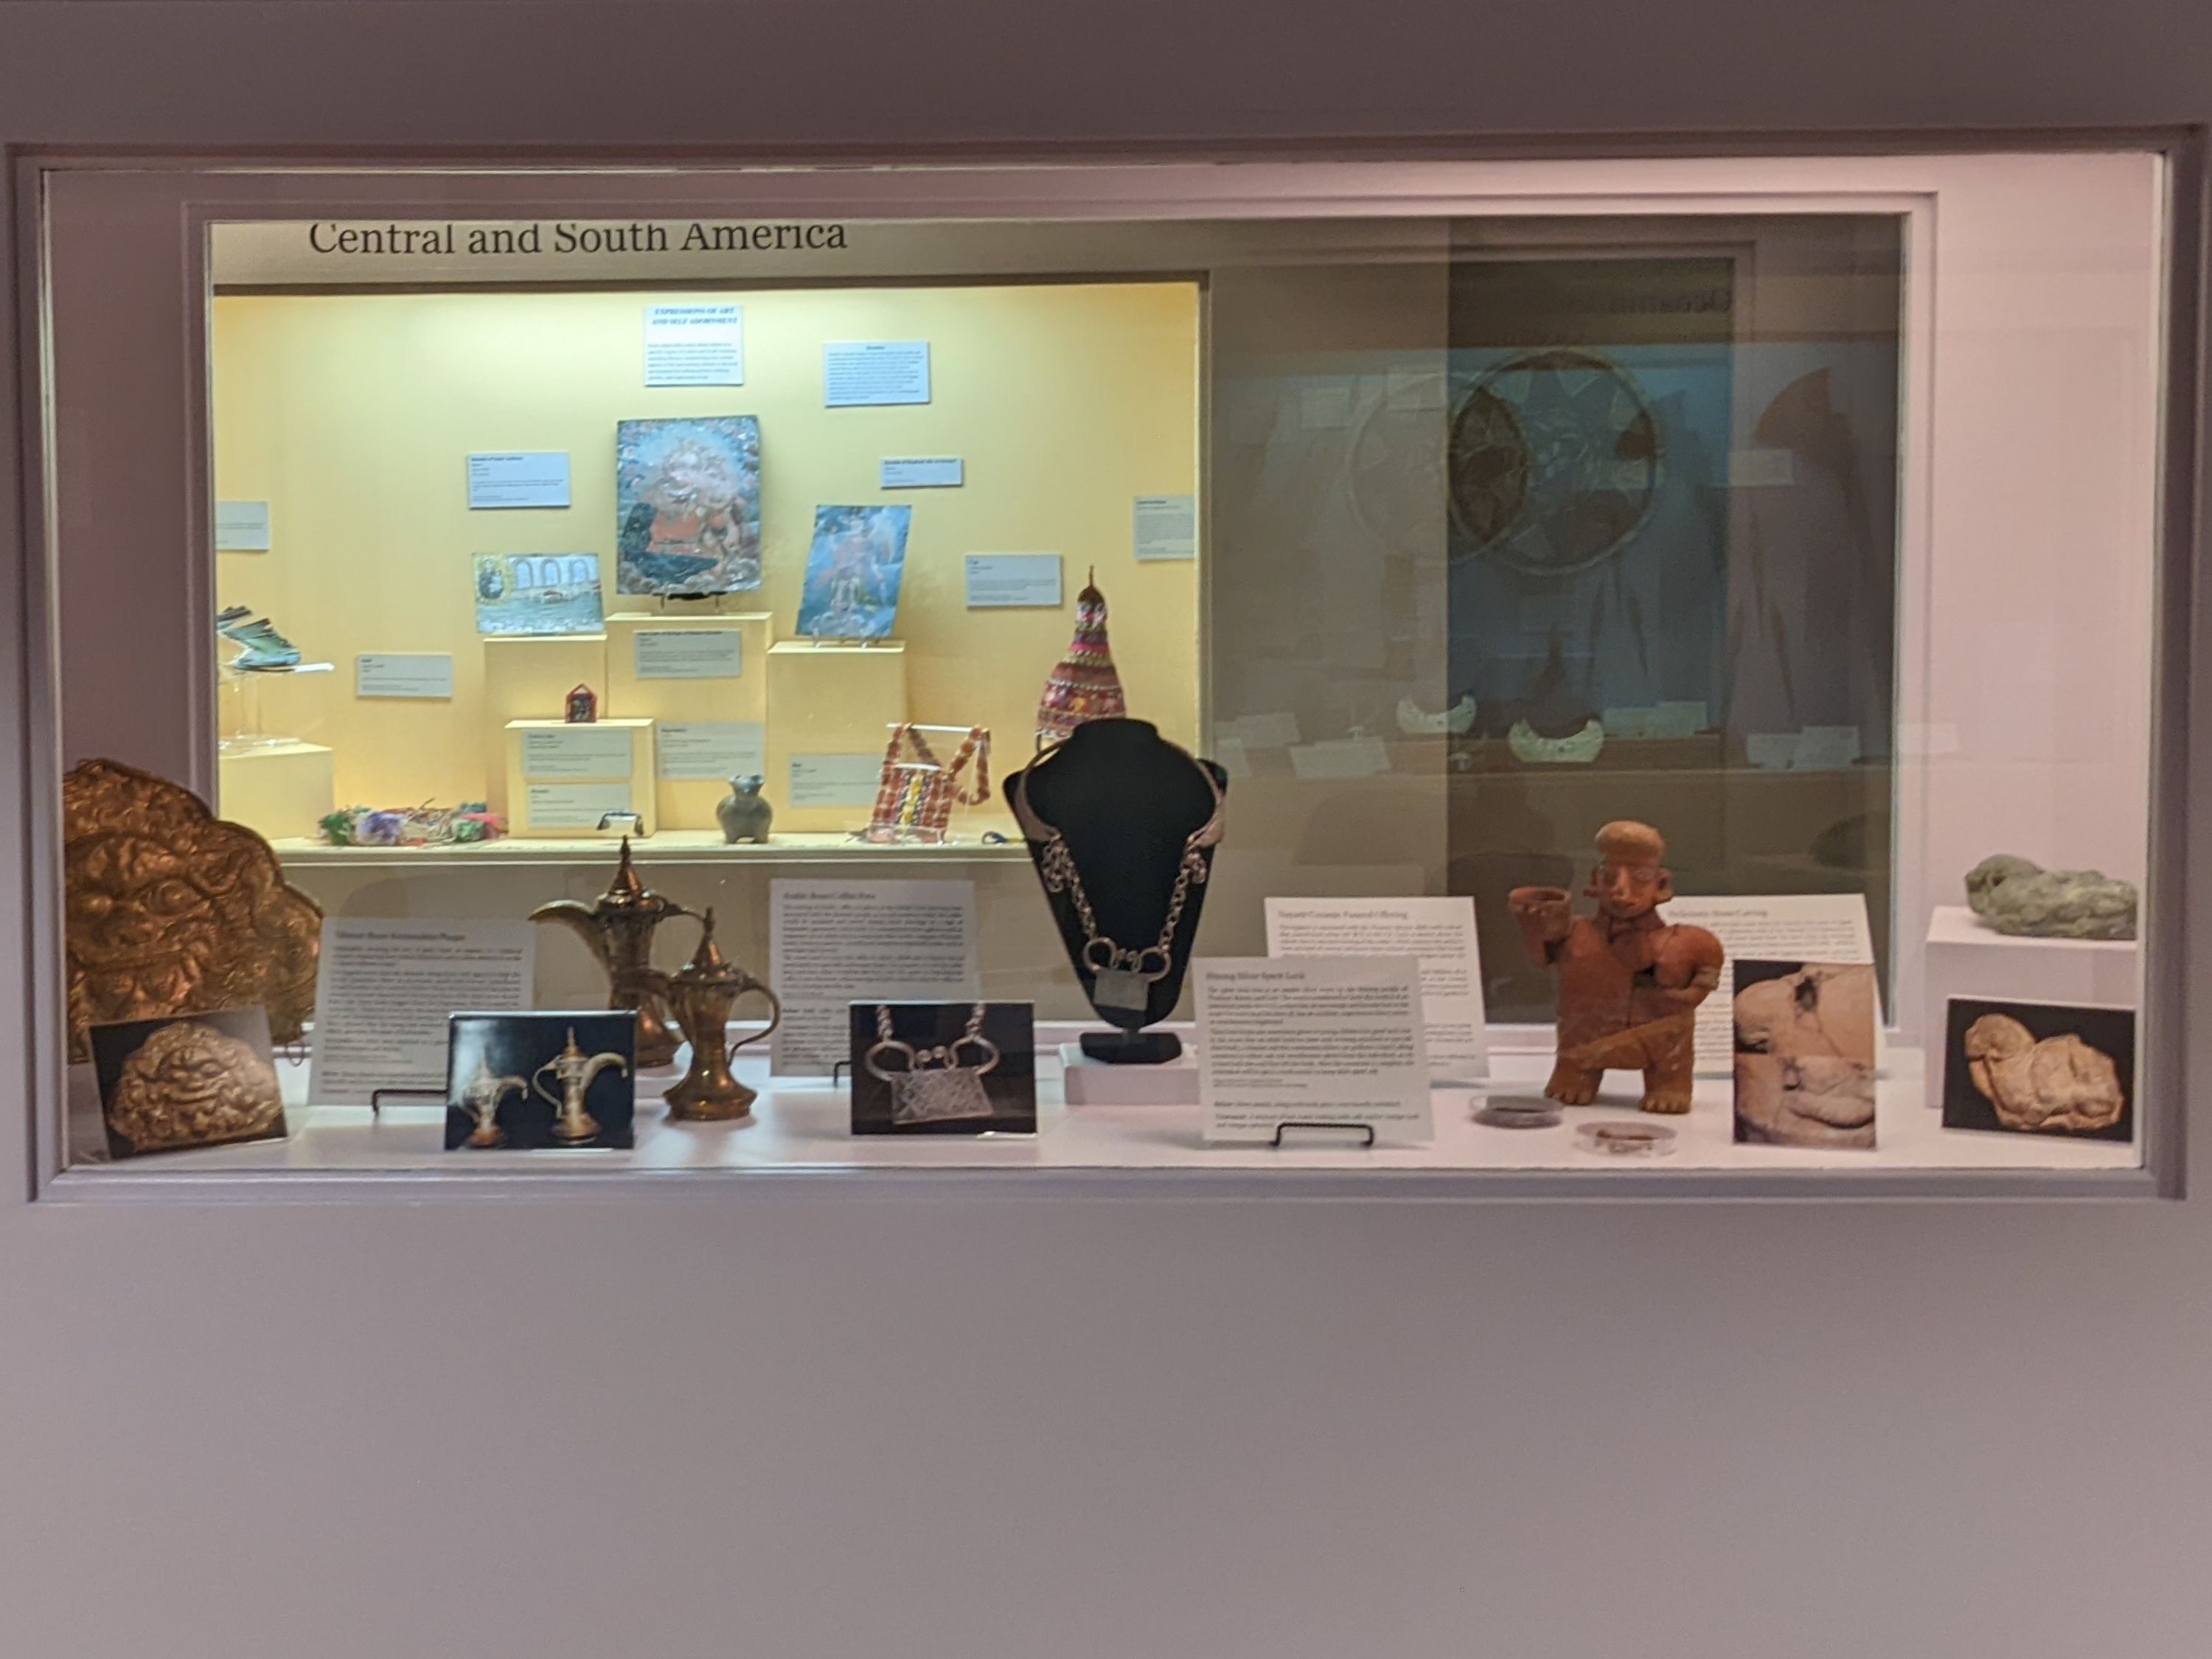 The center cases hold five restored items, including a brass plaque, brass coffee pots, silver necklace, terracotta color ceramic figure, and a stone carving with a green tint. Besides the objects are label information on the object and before treatment photographs.